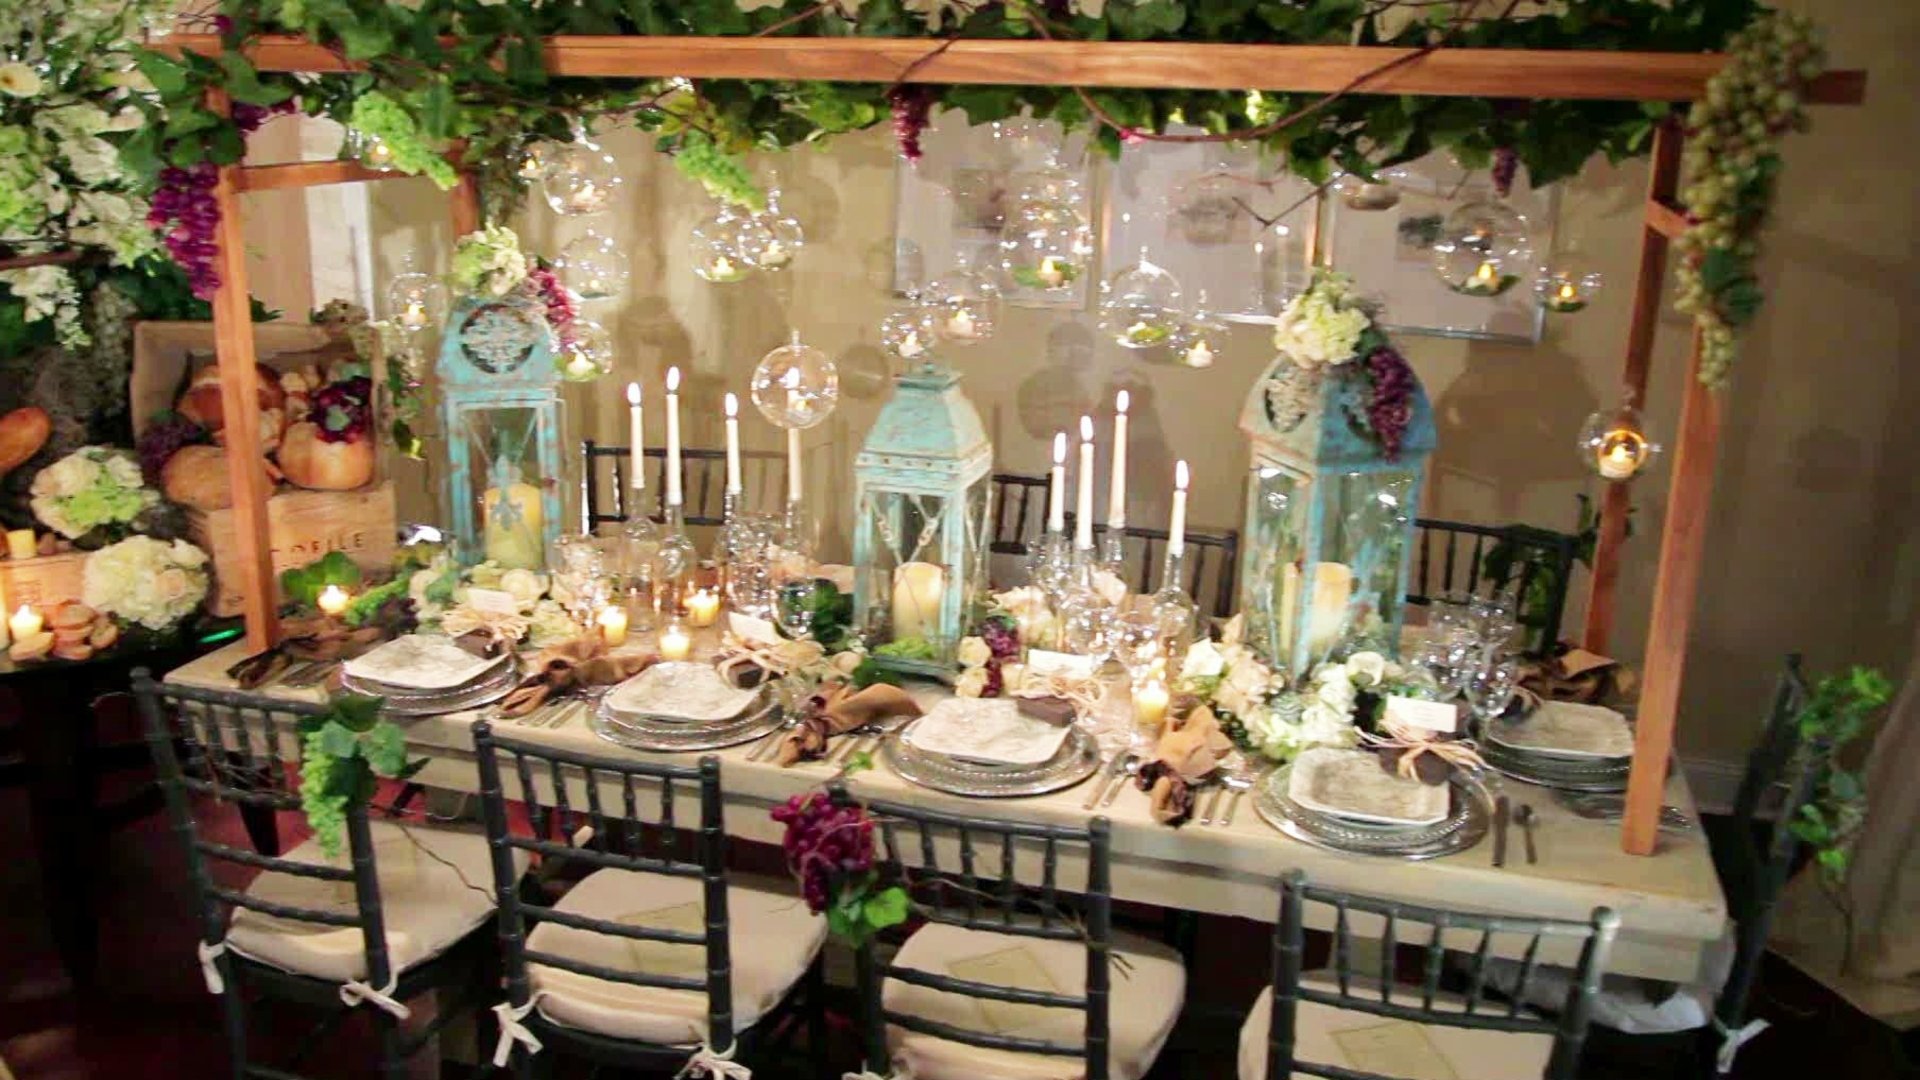 10 Wonderful Dinner Party Ideas For Adults wine tasting dinner party video hgtv 2022